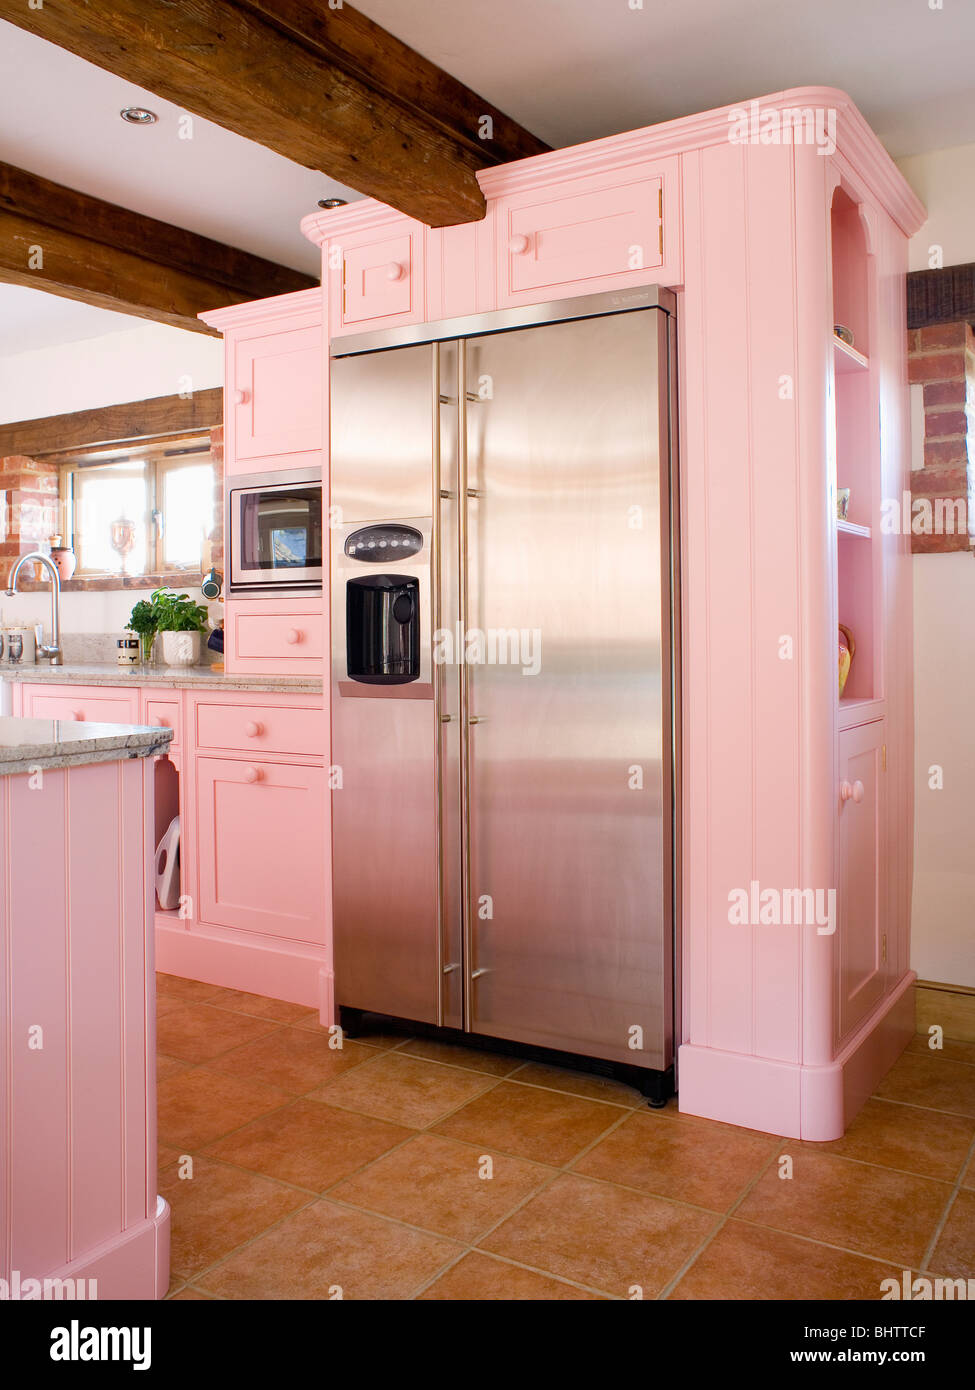 Large stainless steel American-style fridge-freezer in pastel pink fitted unit in country kitchen Stock Photo